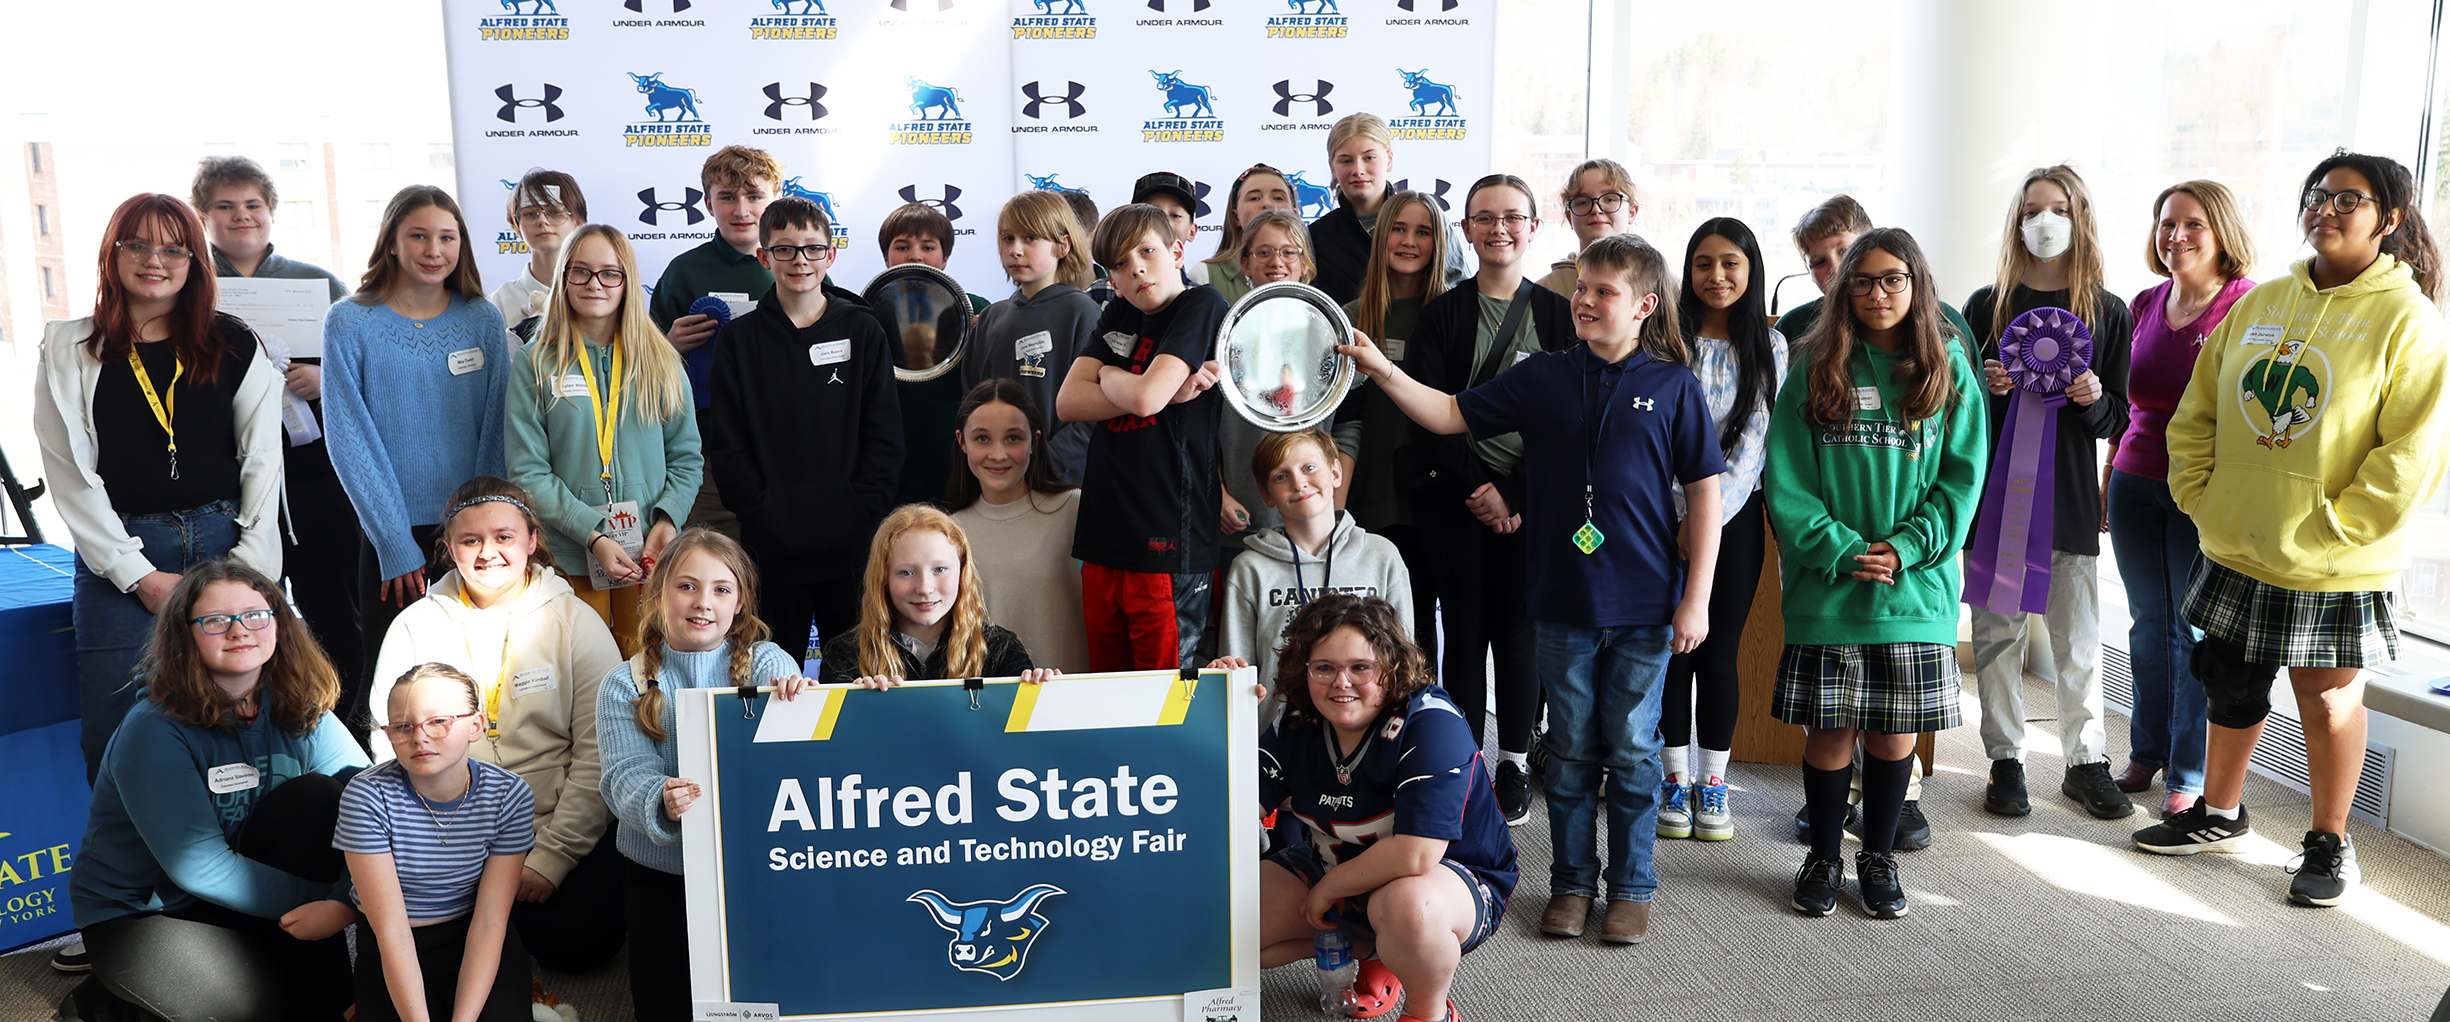 group shot of participants in the Alfred State Science and Technology Fair